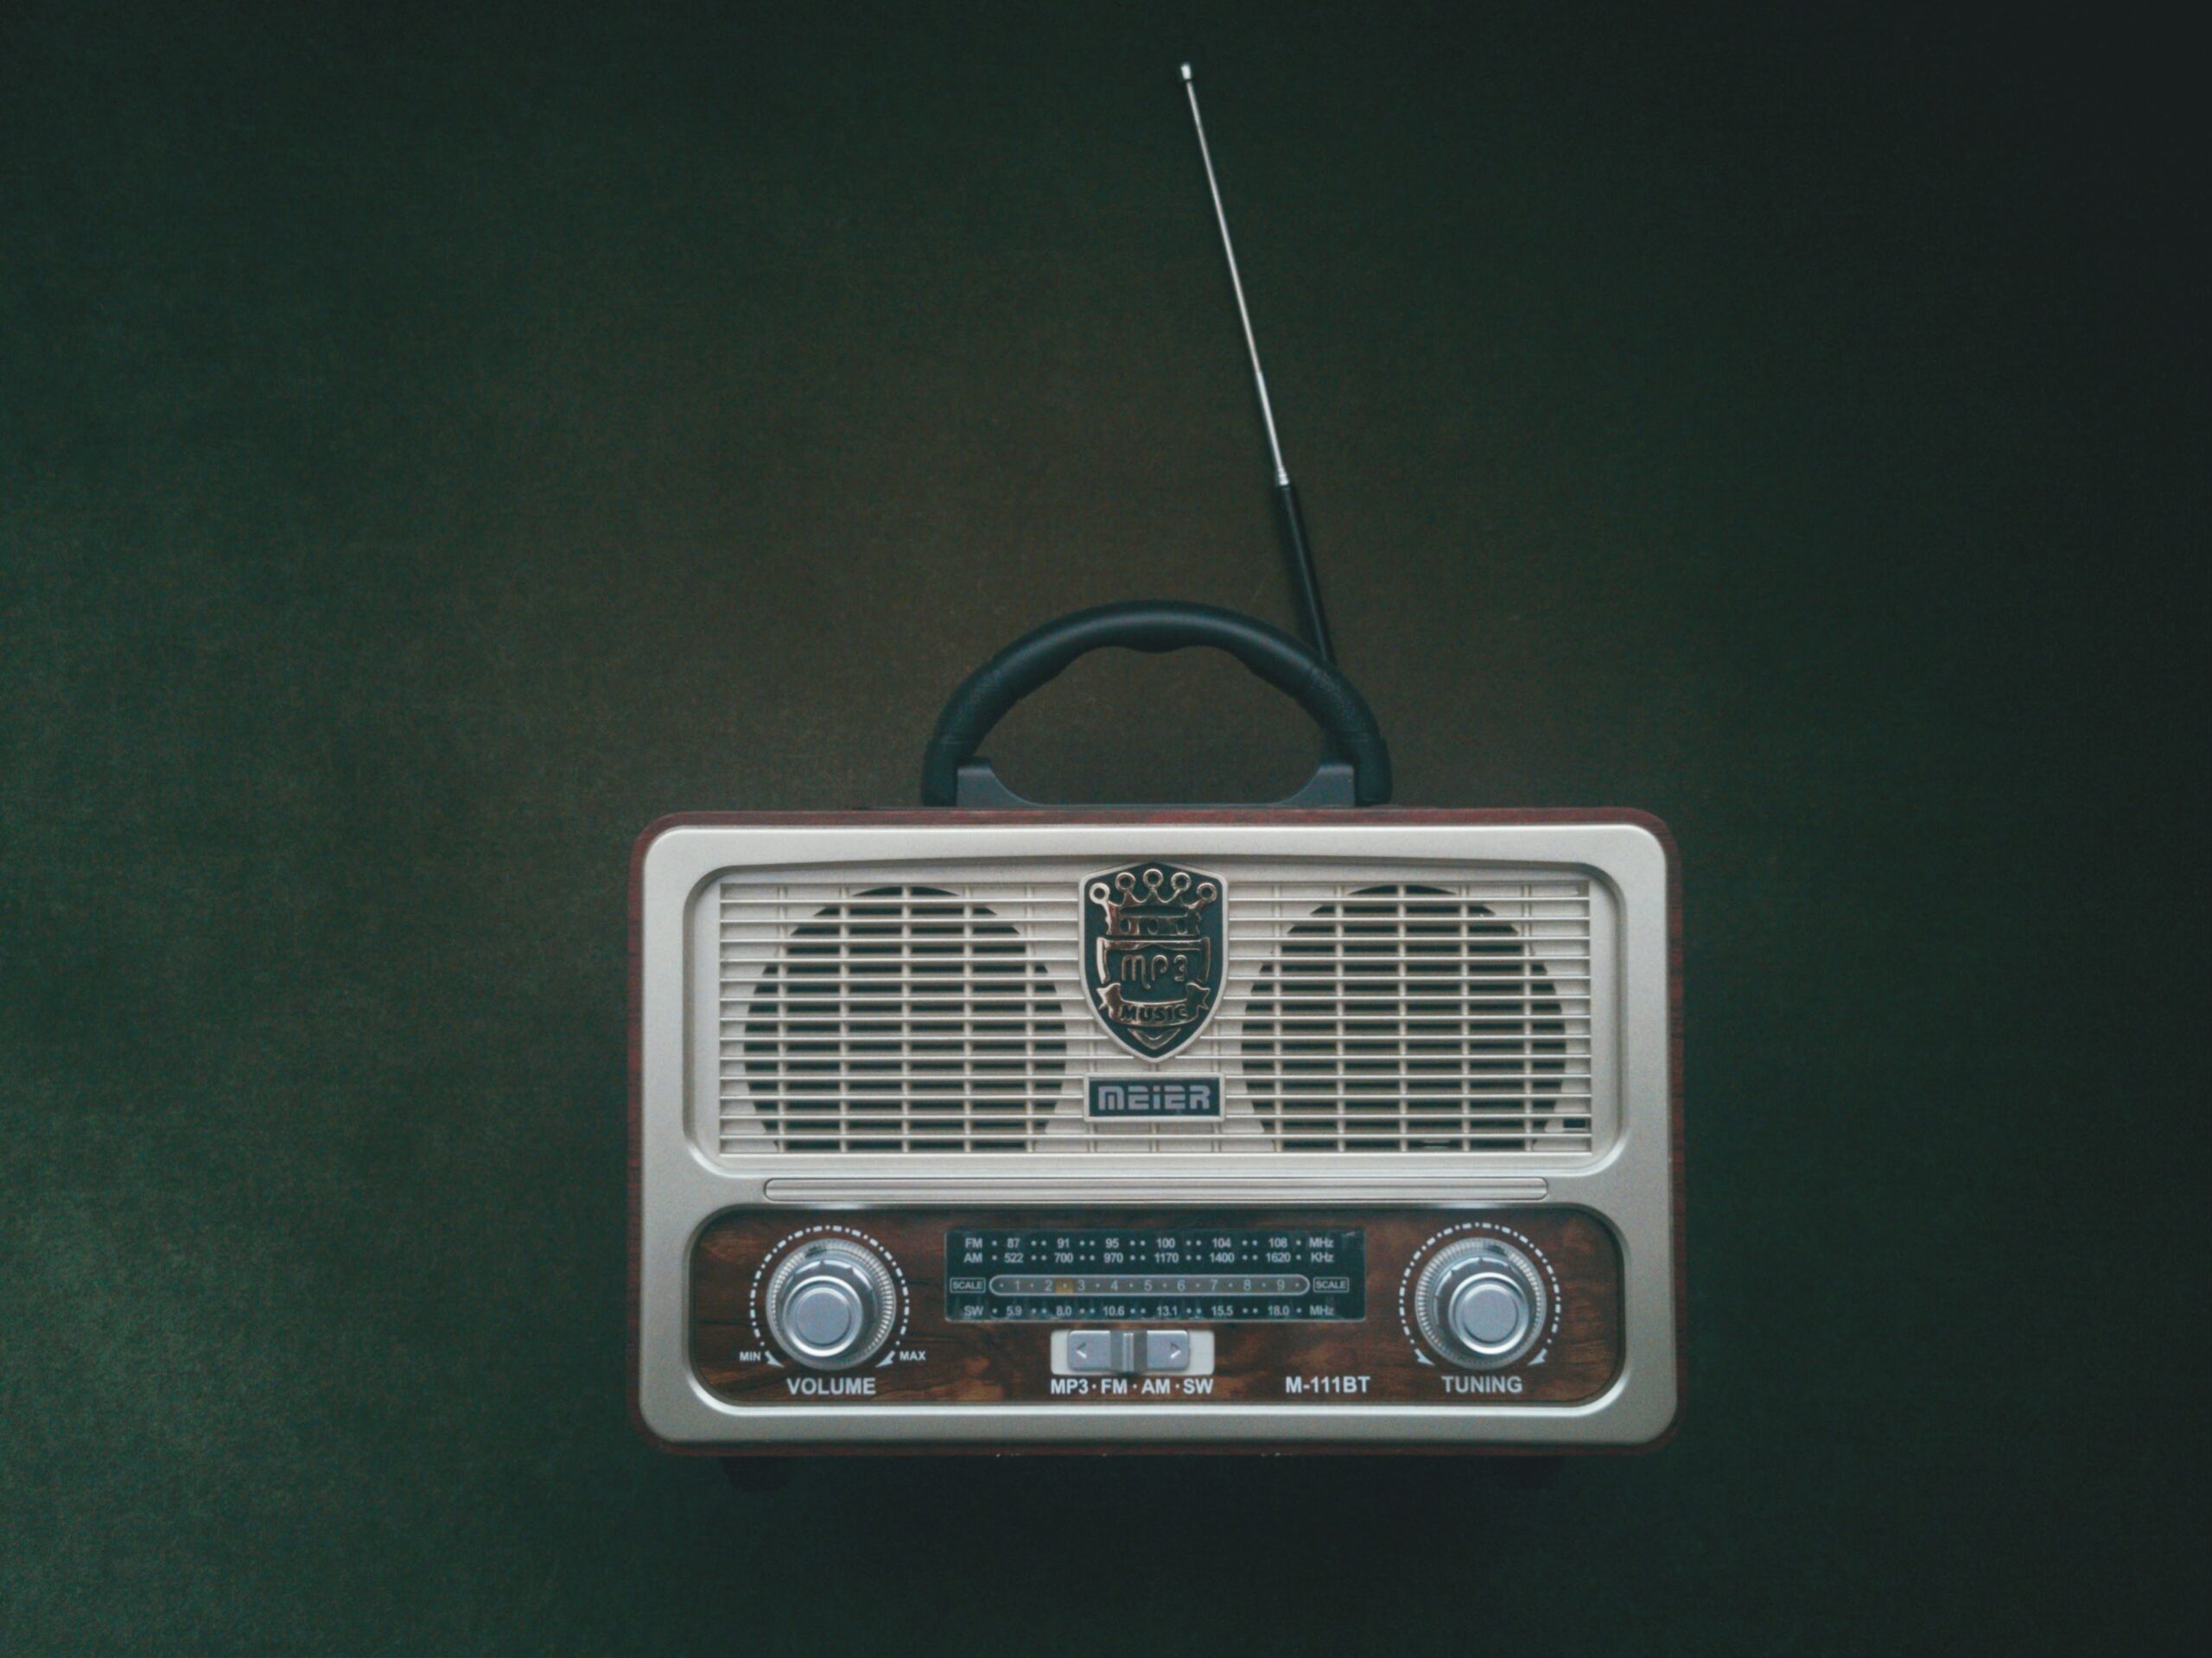 Photo of a portable radio with antenna against a grey backdrop.